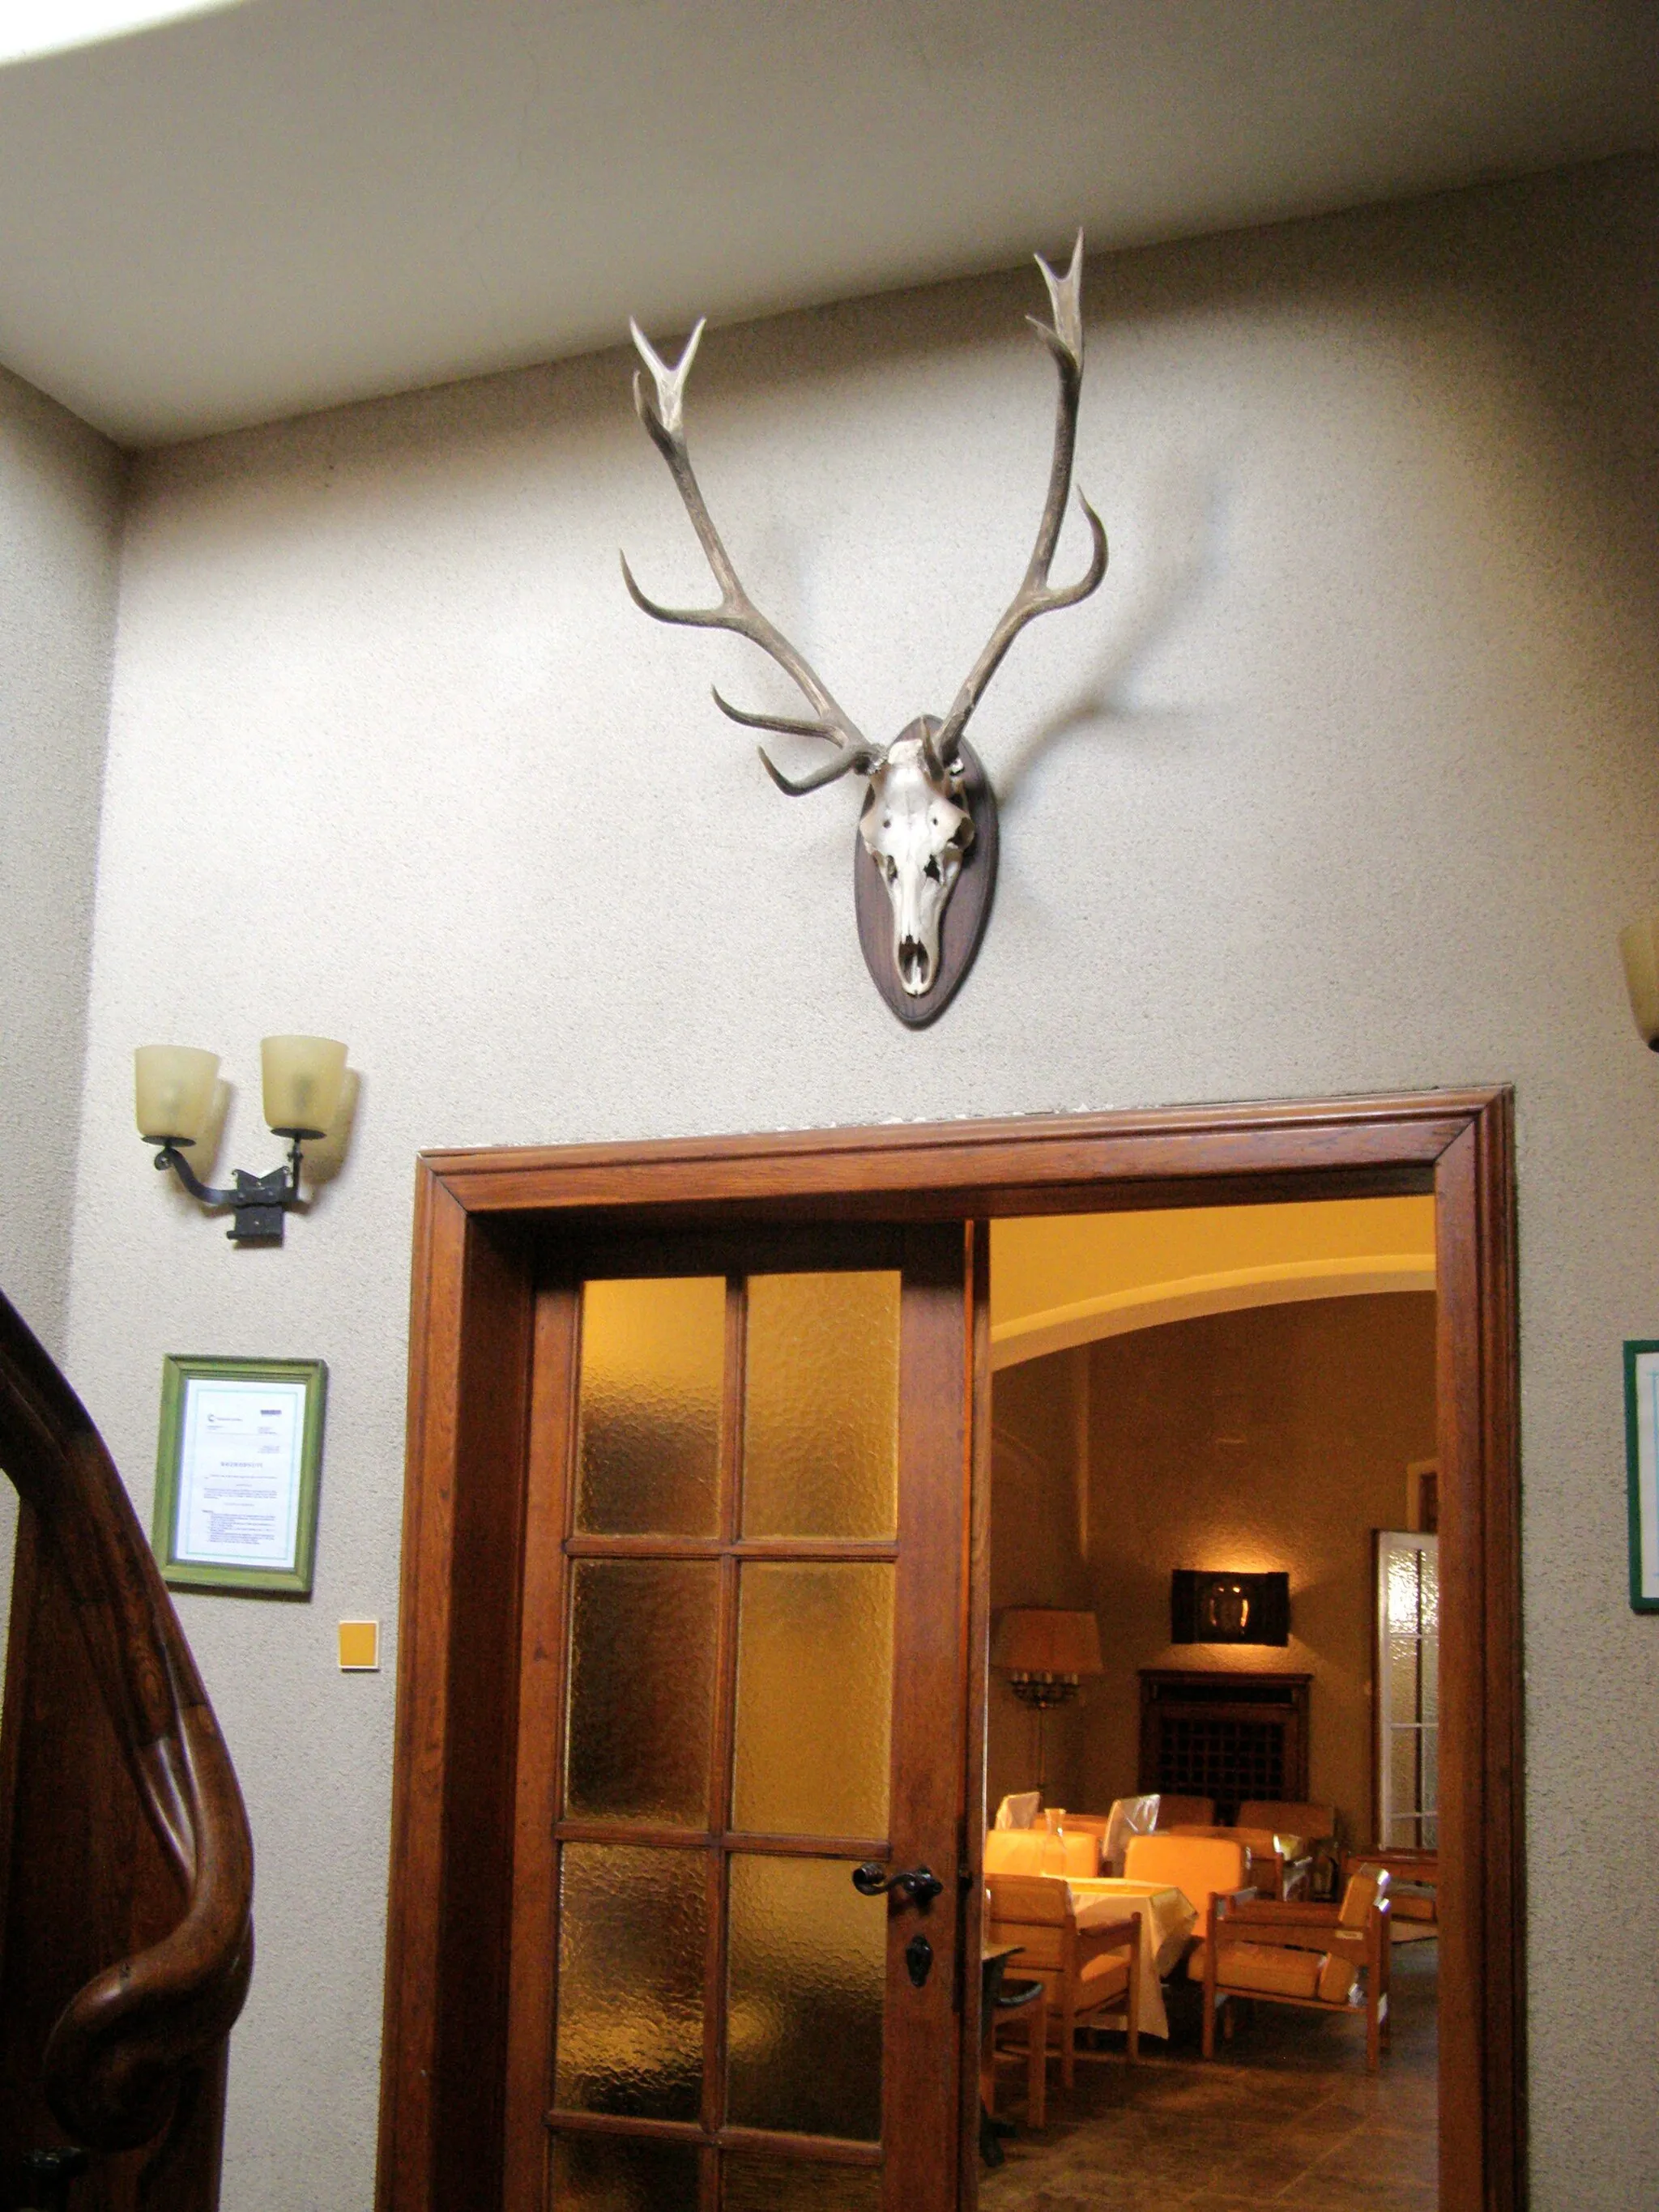 Photo showing: Area of hunting lodge Tři trubky ("Three tubes") in Brdy, Czech Republic. Ground floor of the hunting lodge, a hunting trophy above the door.